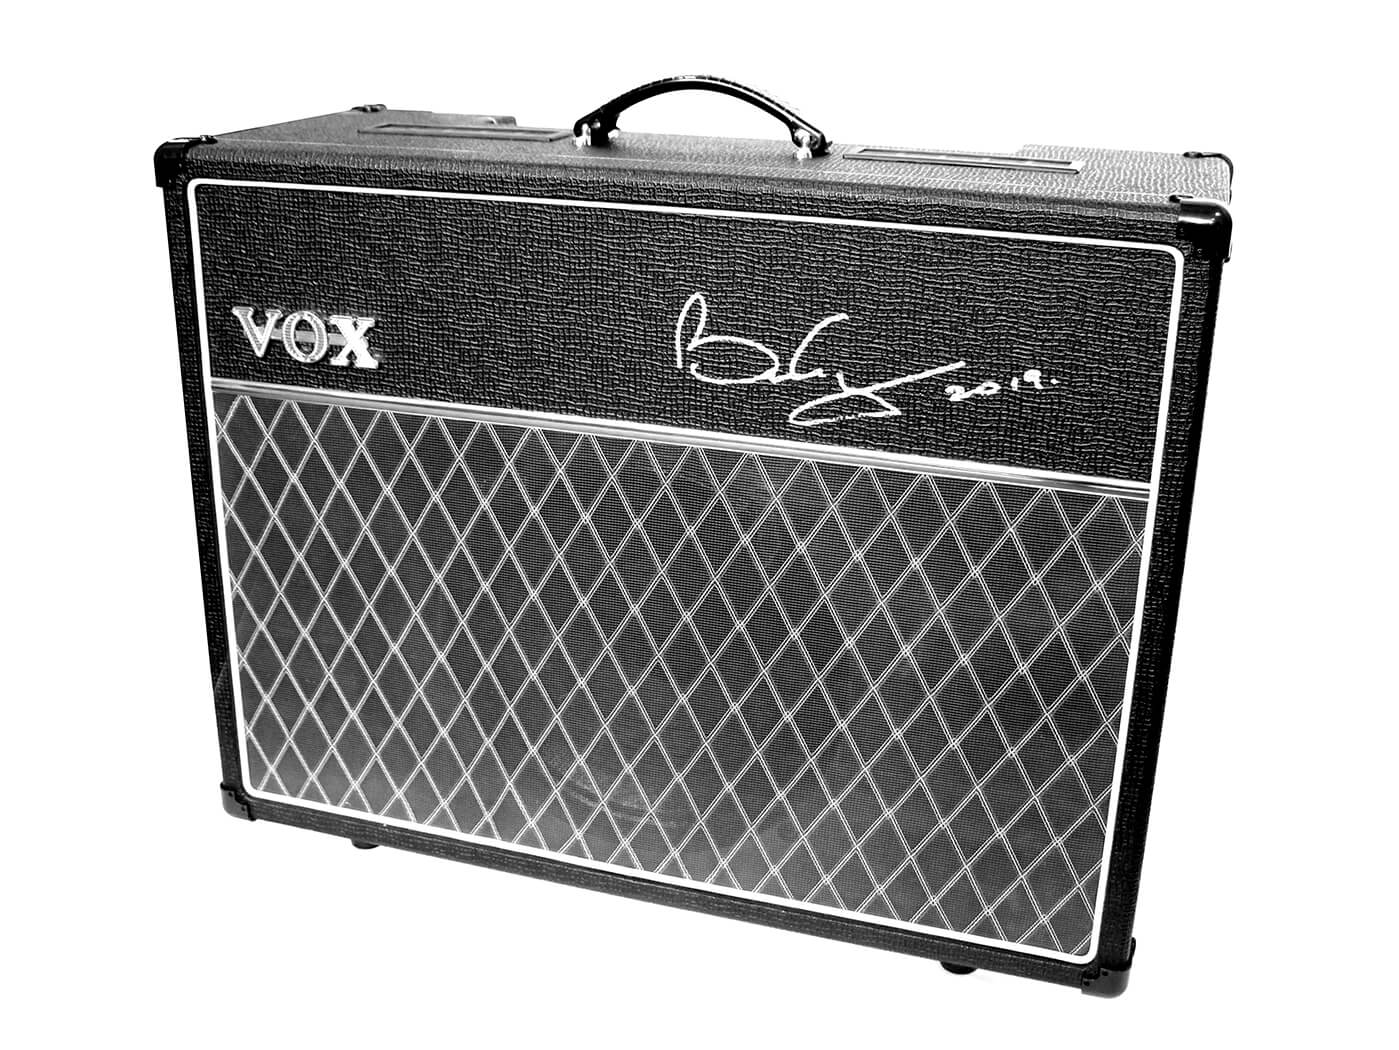 Vox AC30 signed by Queen guitarist Brian May.